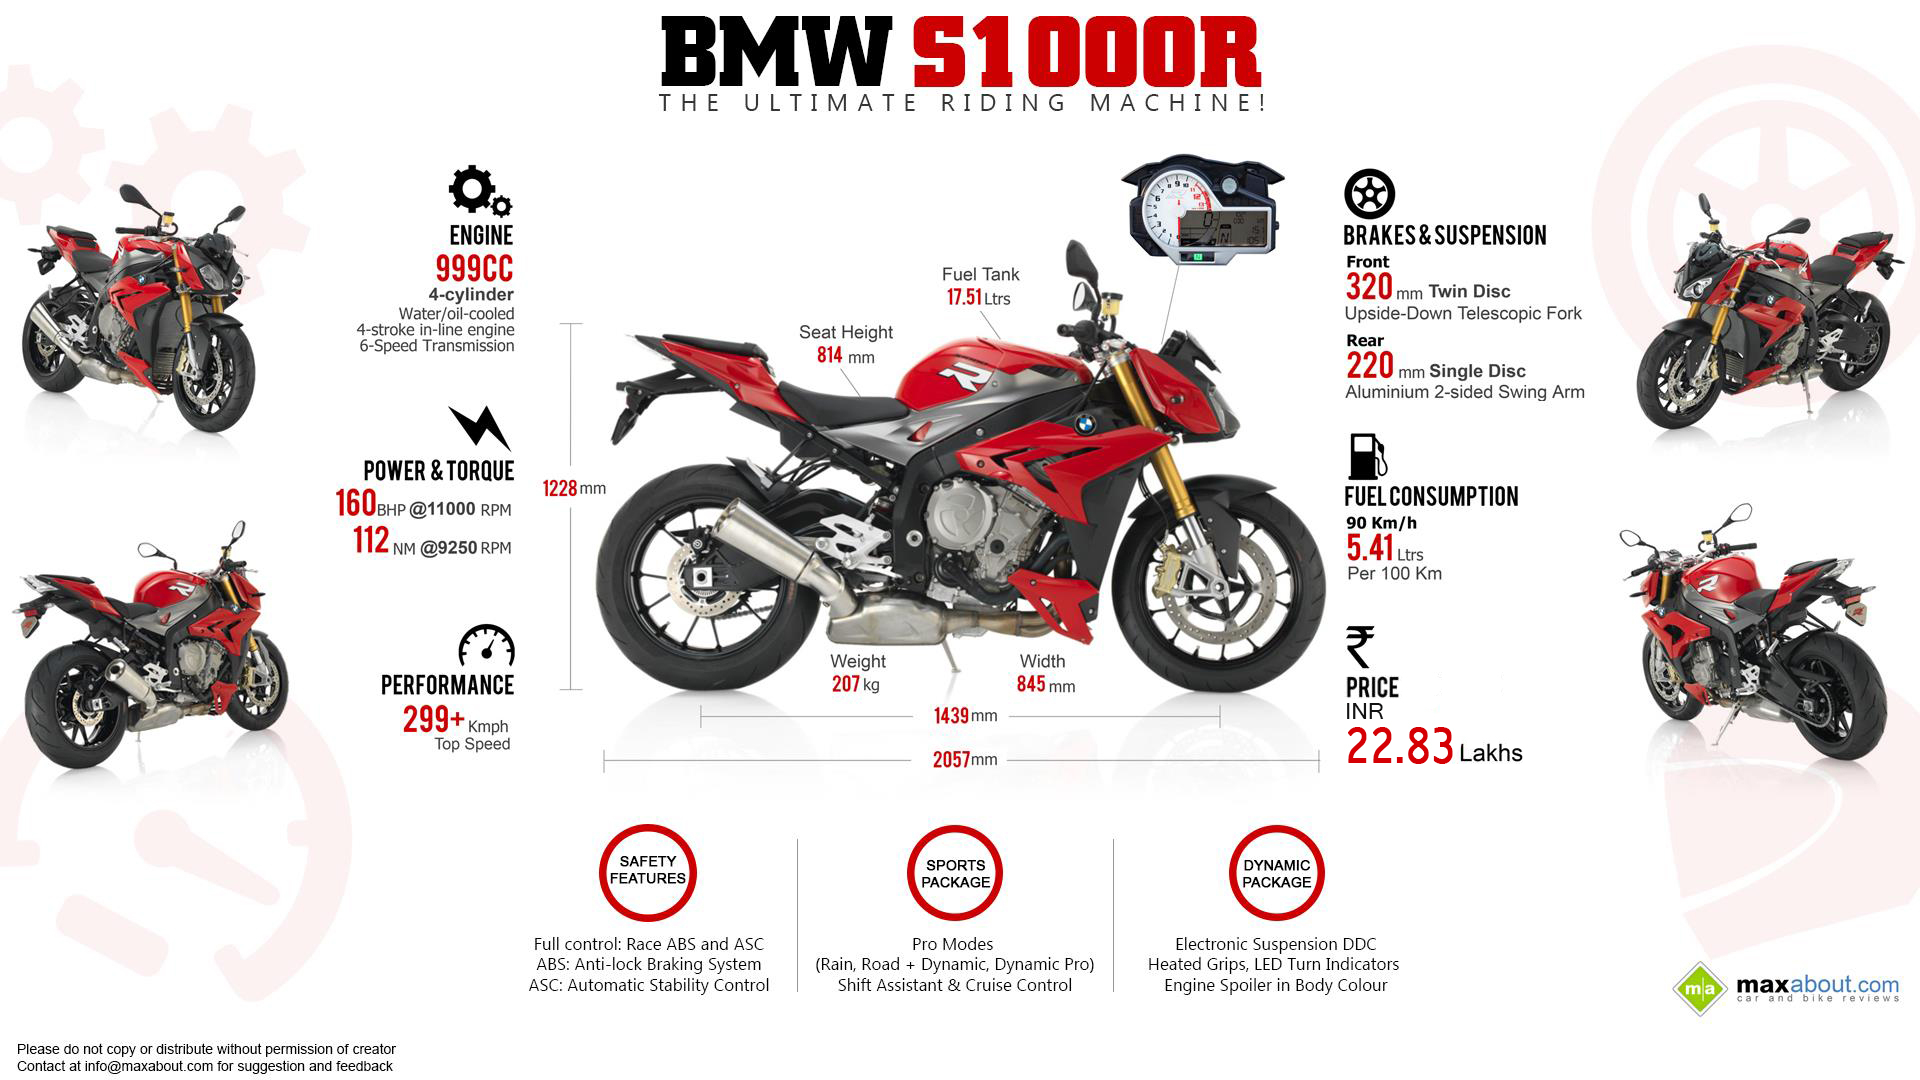 Infographics Image - Motorcycle - HD Wallpaper 